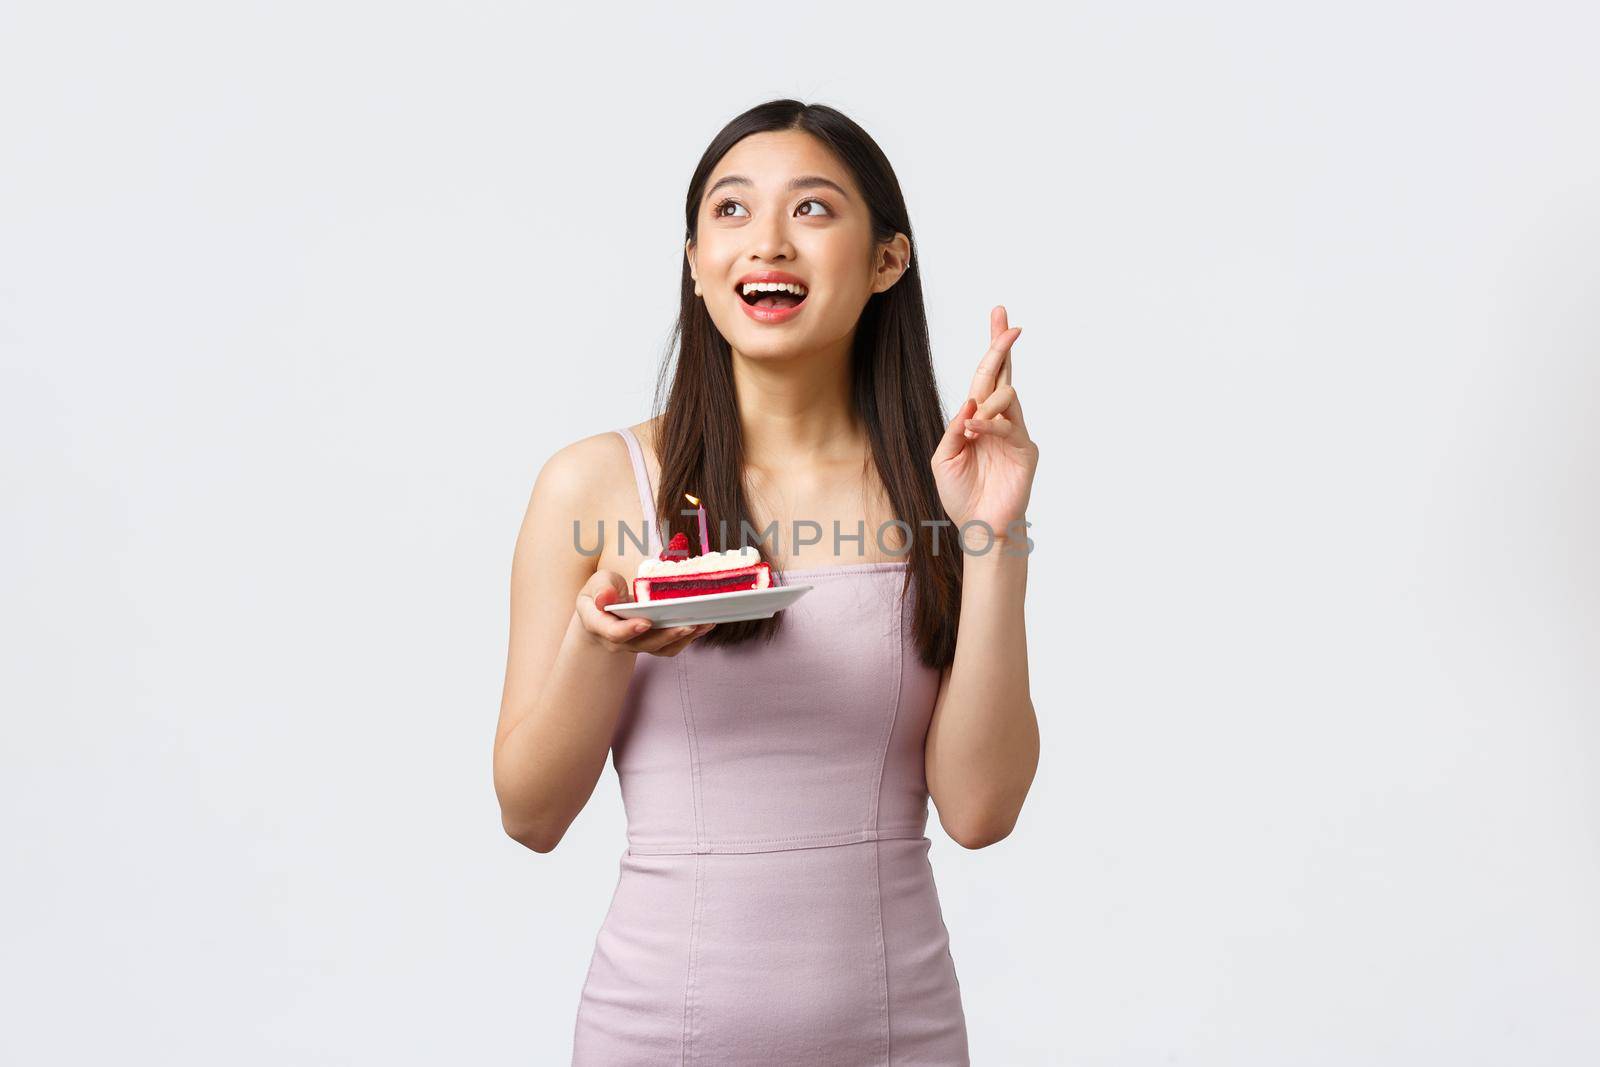 Celebration, party and holidays concept. Hopeful dreamy upbeat birthday girl in dress, cross fingers good luck looking upper left corner, holding b-day cake, white background.